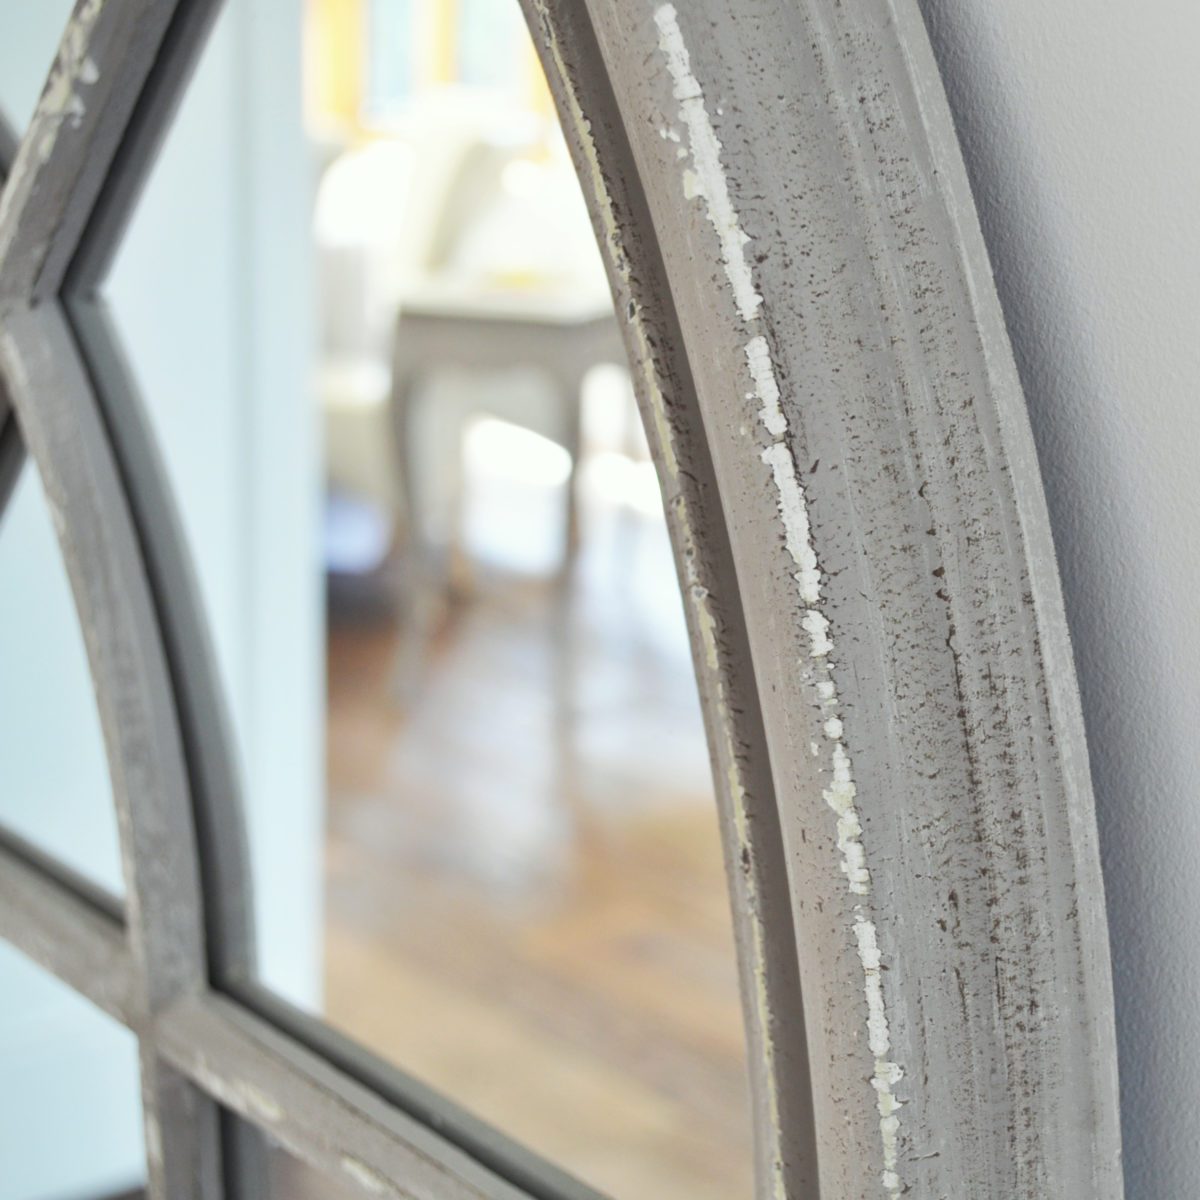 Arched Window Mirror Arched Window Mirror The Frame Is Made In